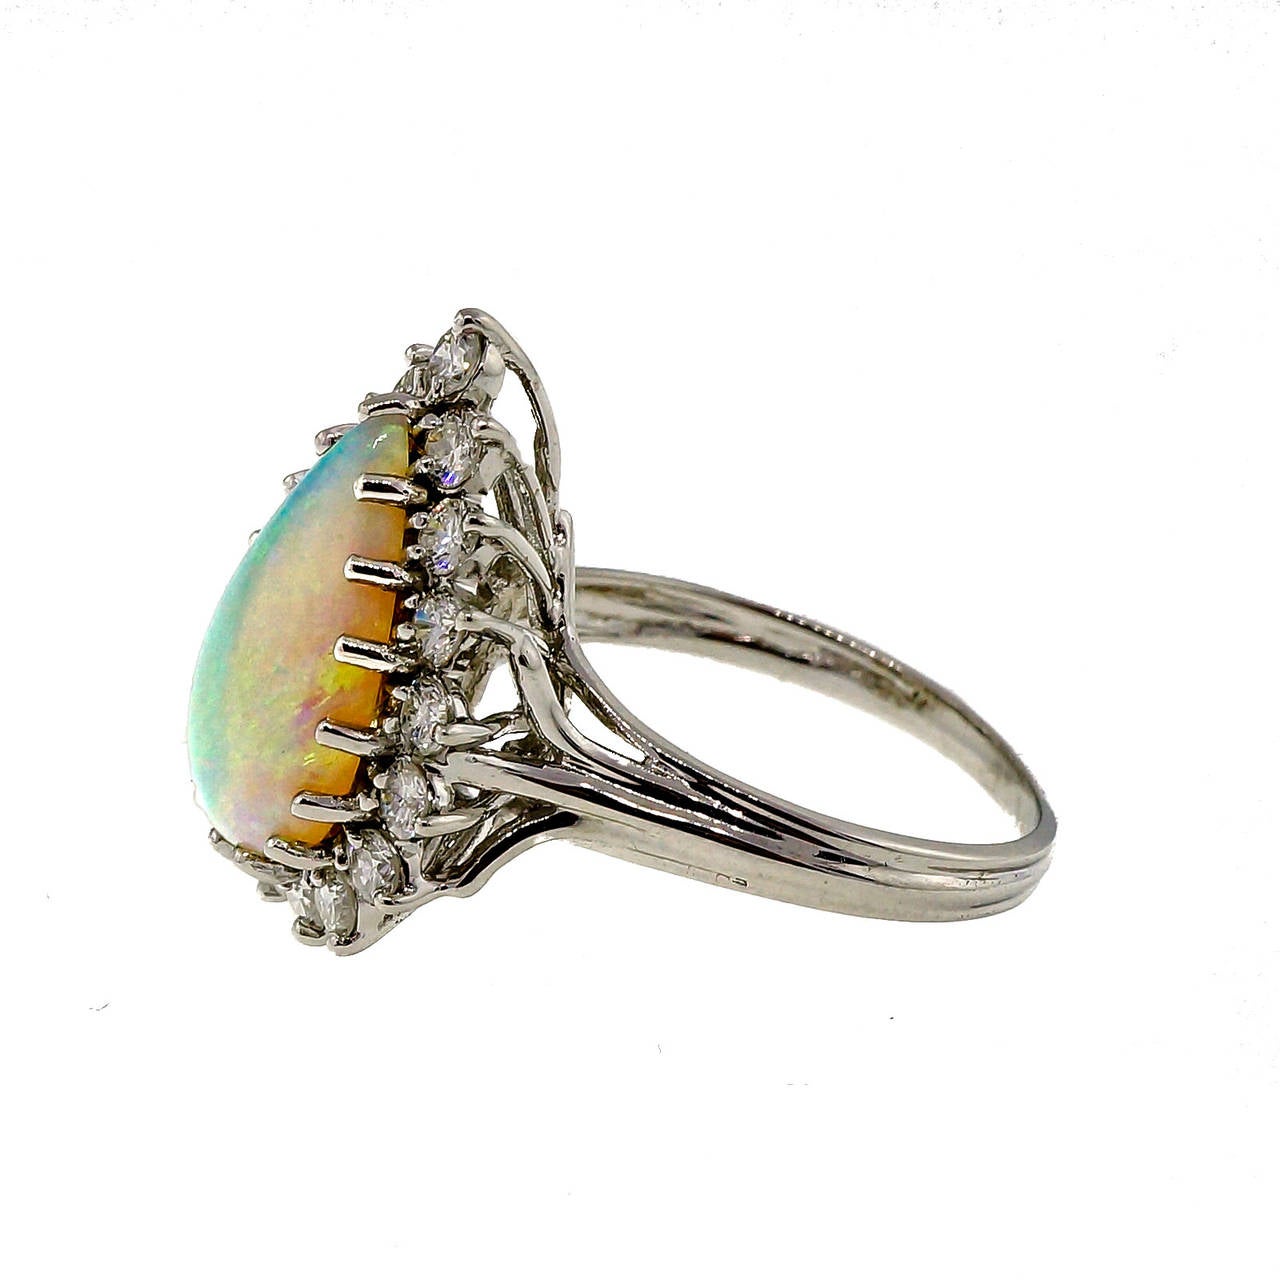 Beautiful classic 1950’s top quality well-polished Opal ring. Translucent blue green Opal with lots of orange flash surrounded by nice full cut diamonds. The orange is so bright it looks like an orange flash light in the stone.

1 blue green